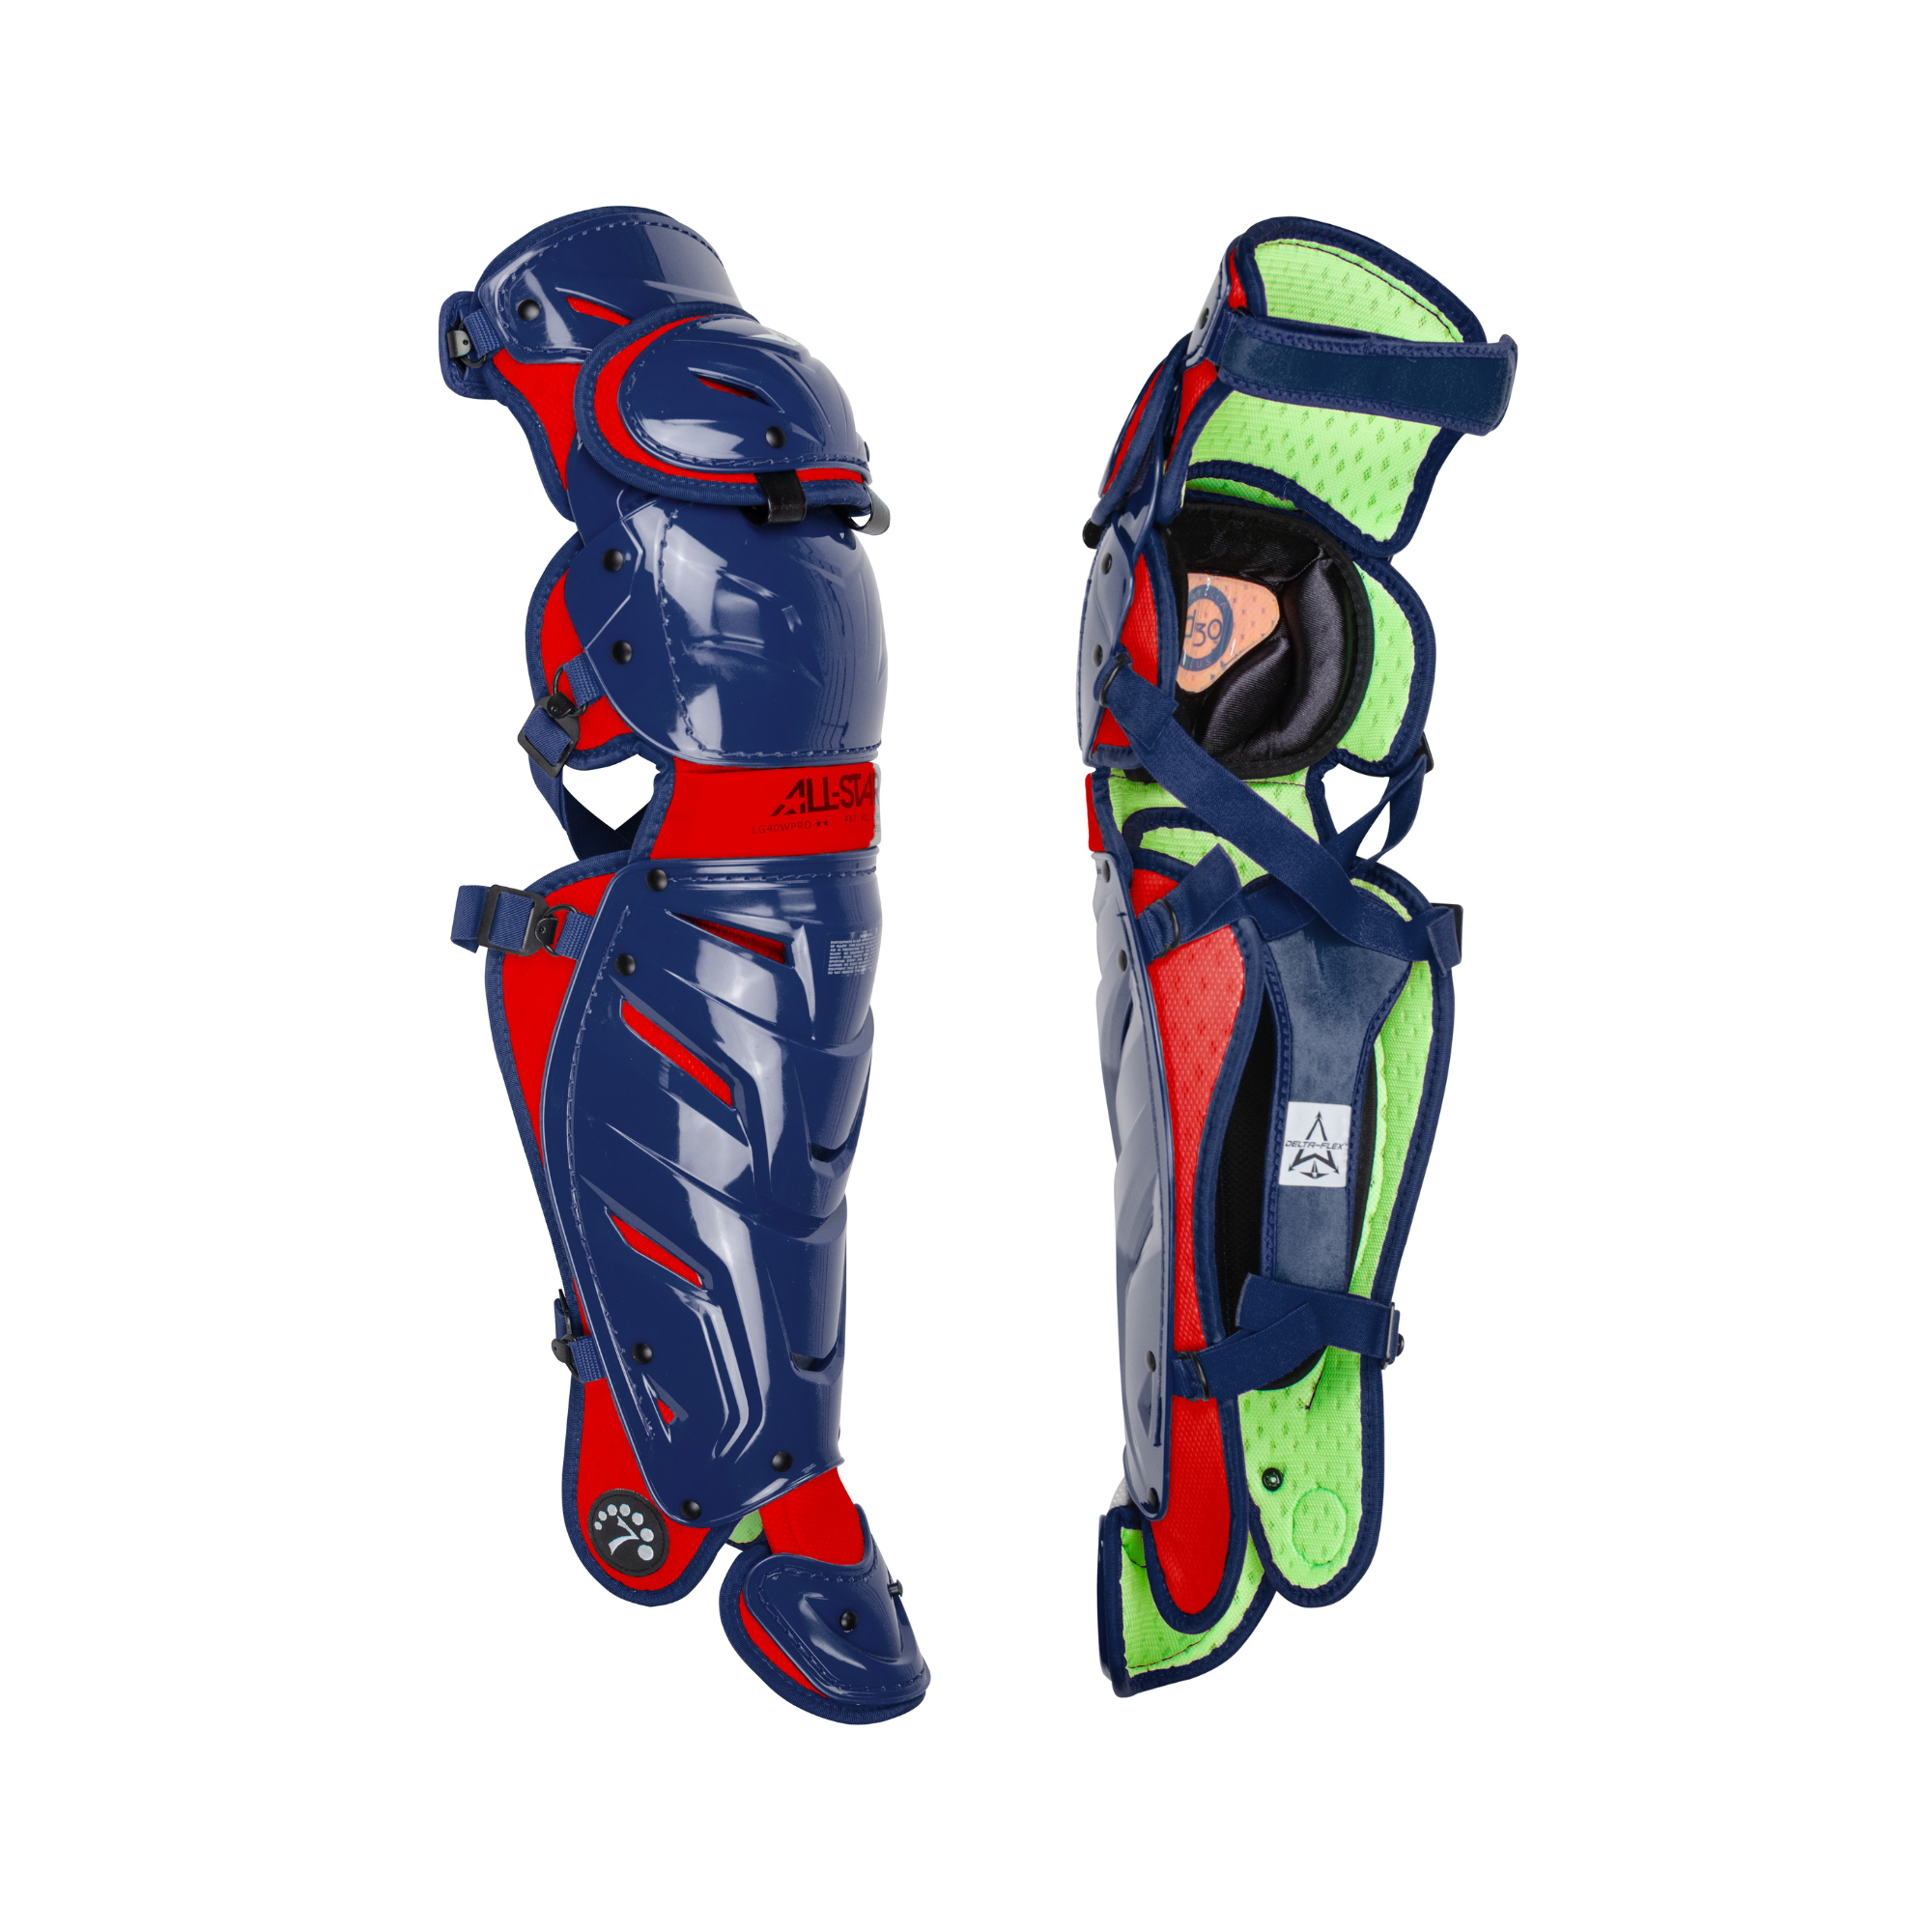 All-Star S7 Leg Guards / Meets NOCSAE / Two Tone / Adult